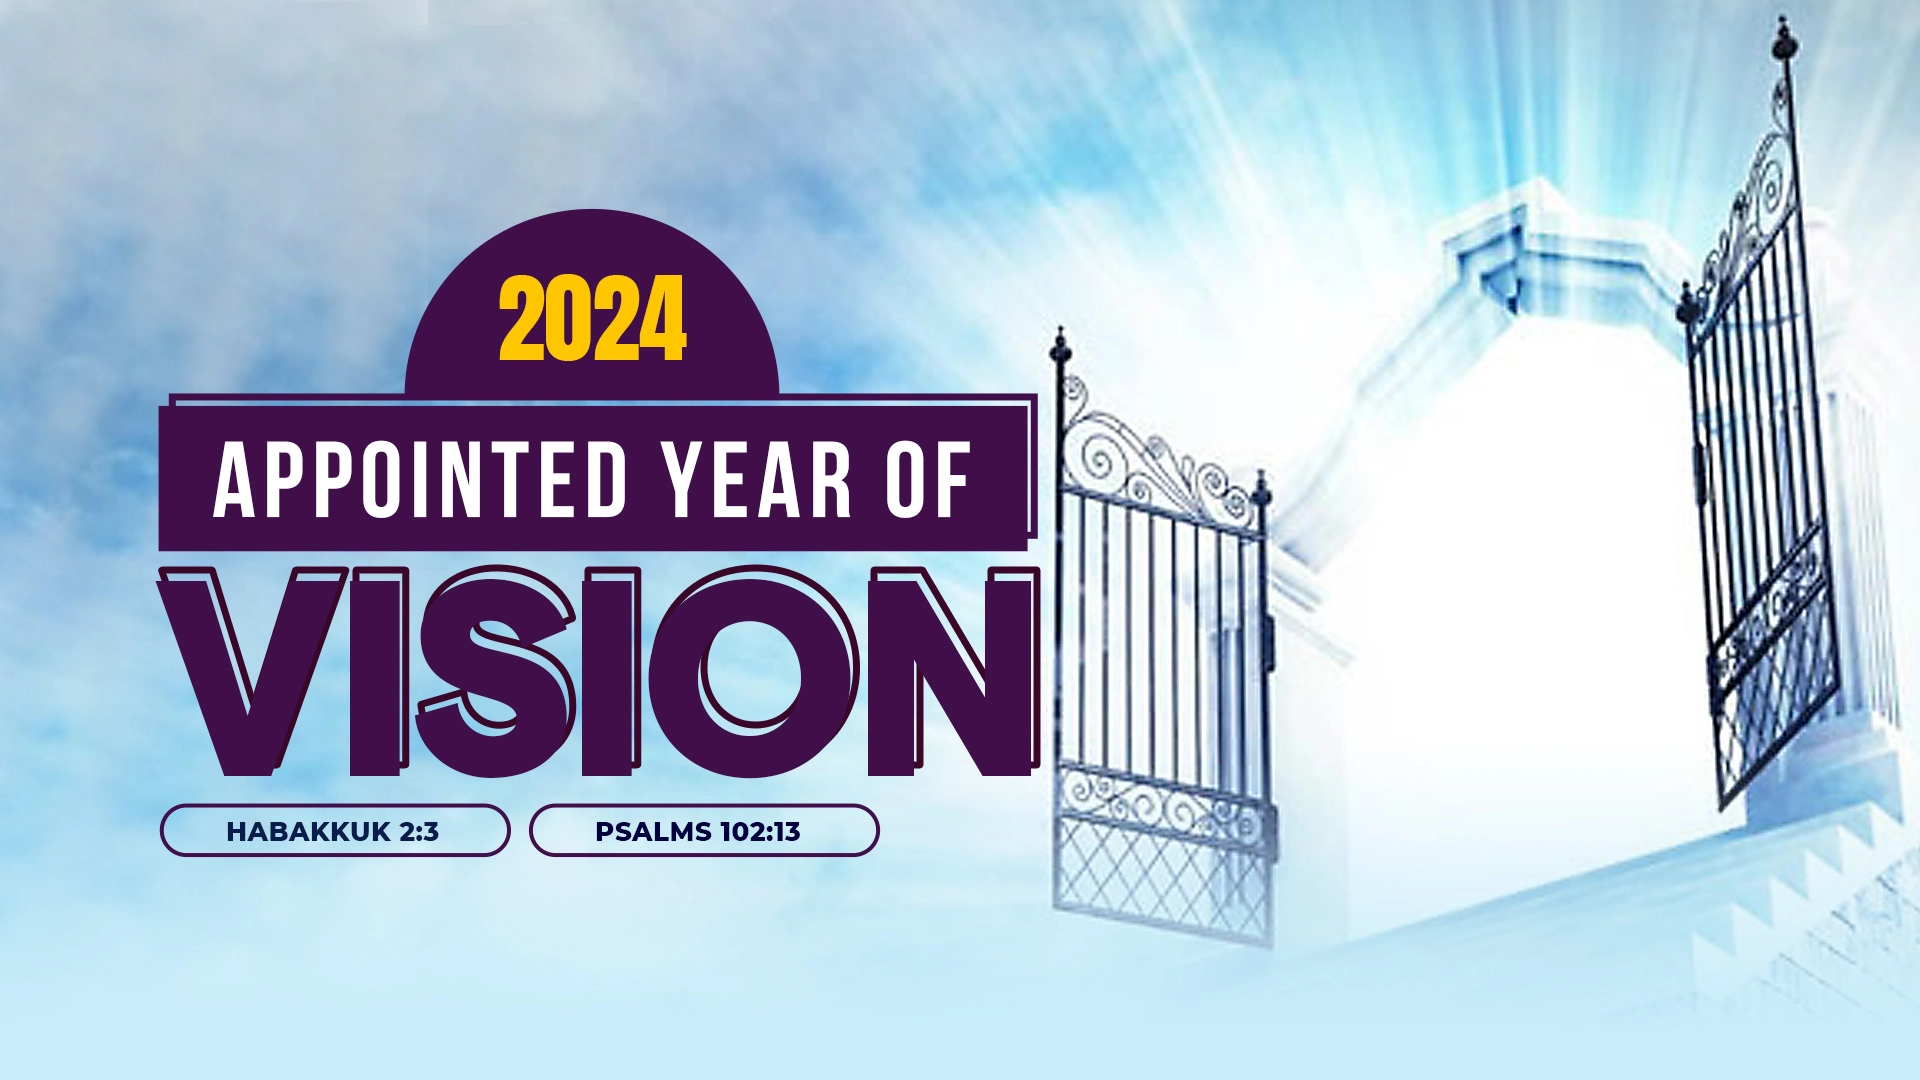 2024: appointed year of vision